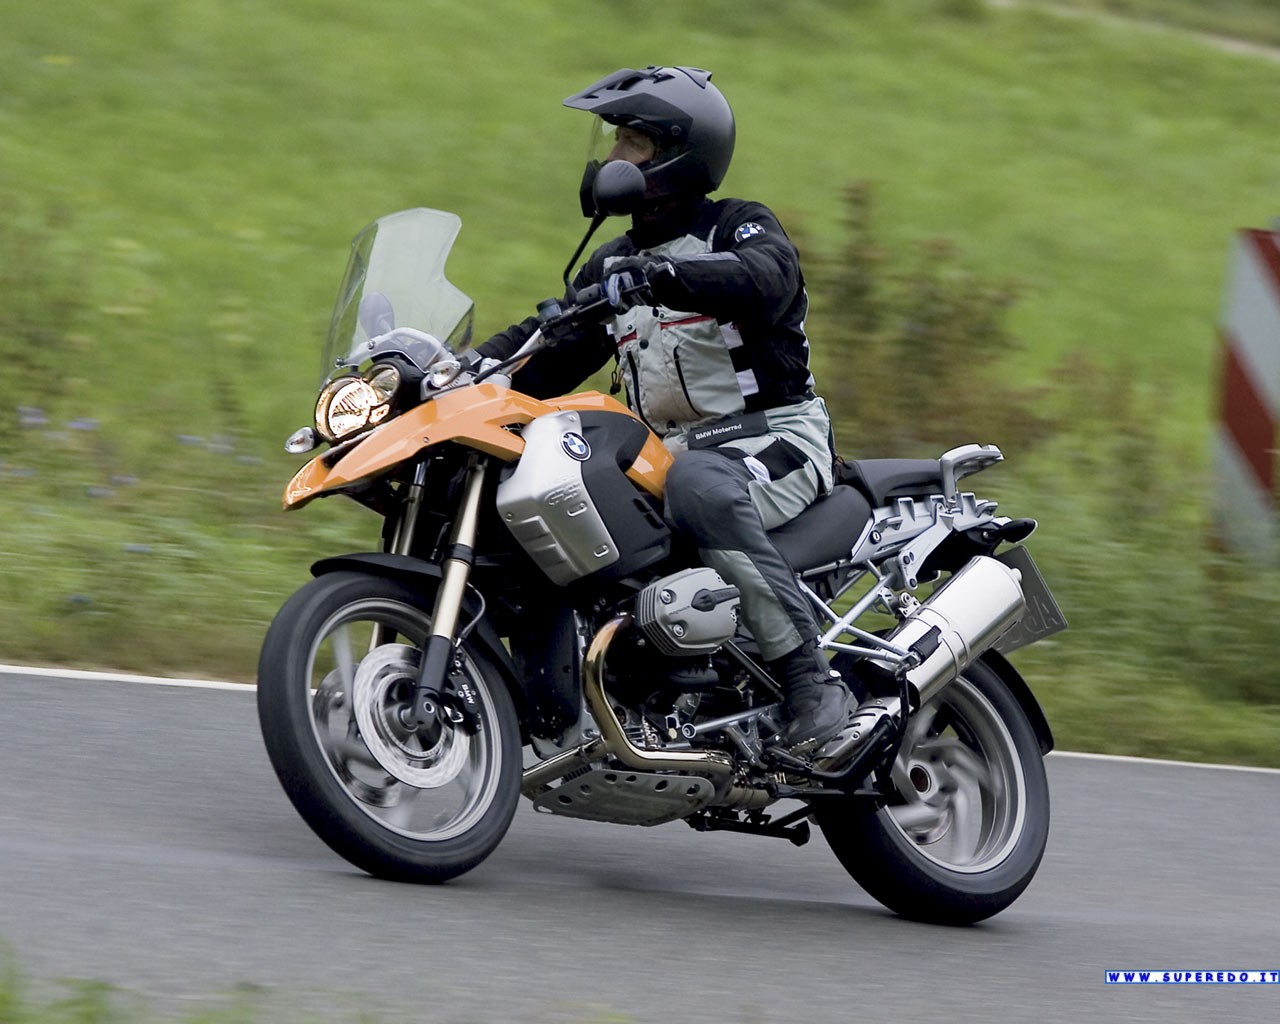 Bmw Motorcycles - Bmw R 1200 Gs 2009 Offroad - HD Wallpaper 